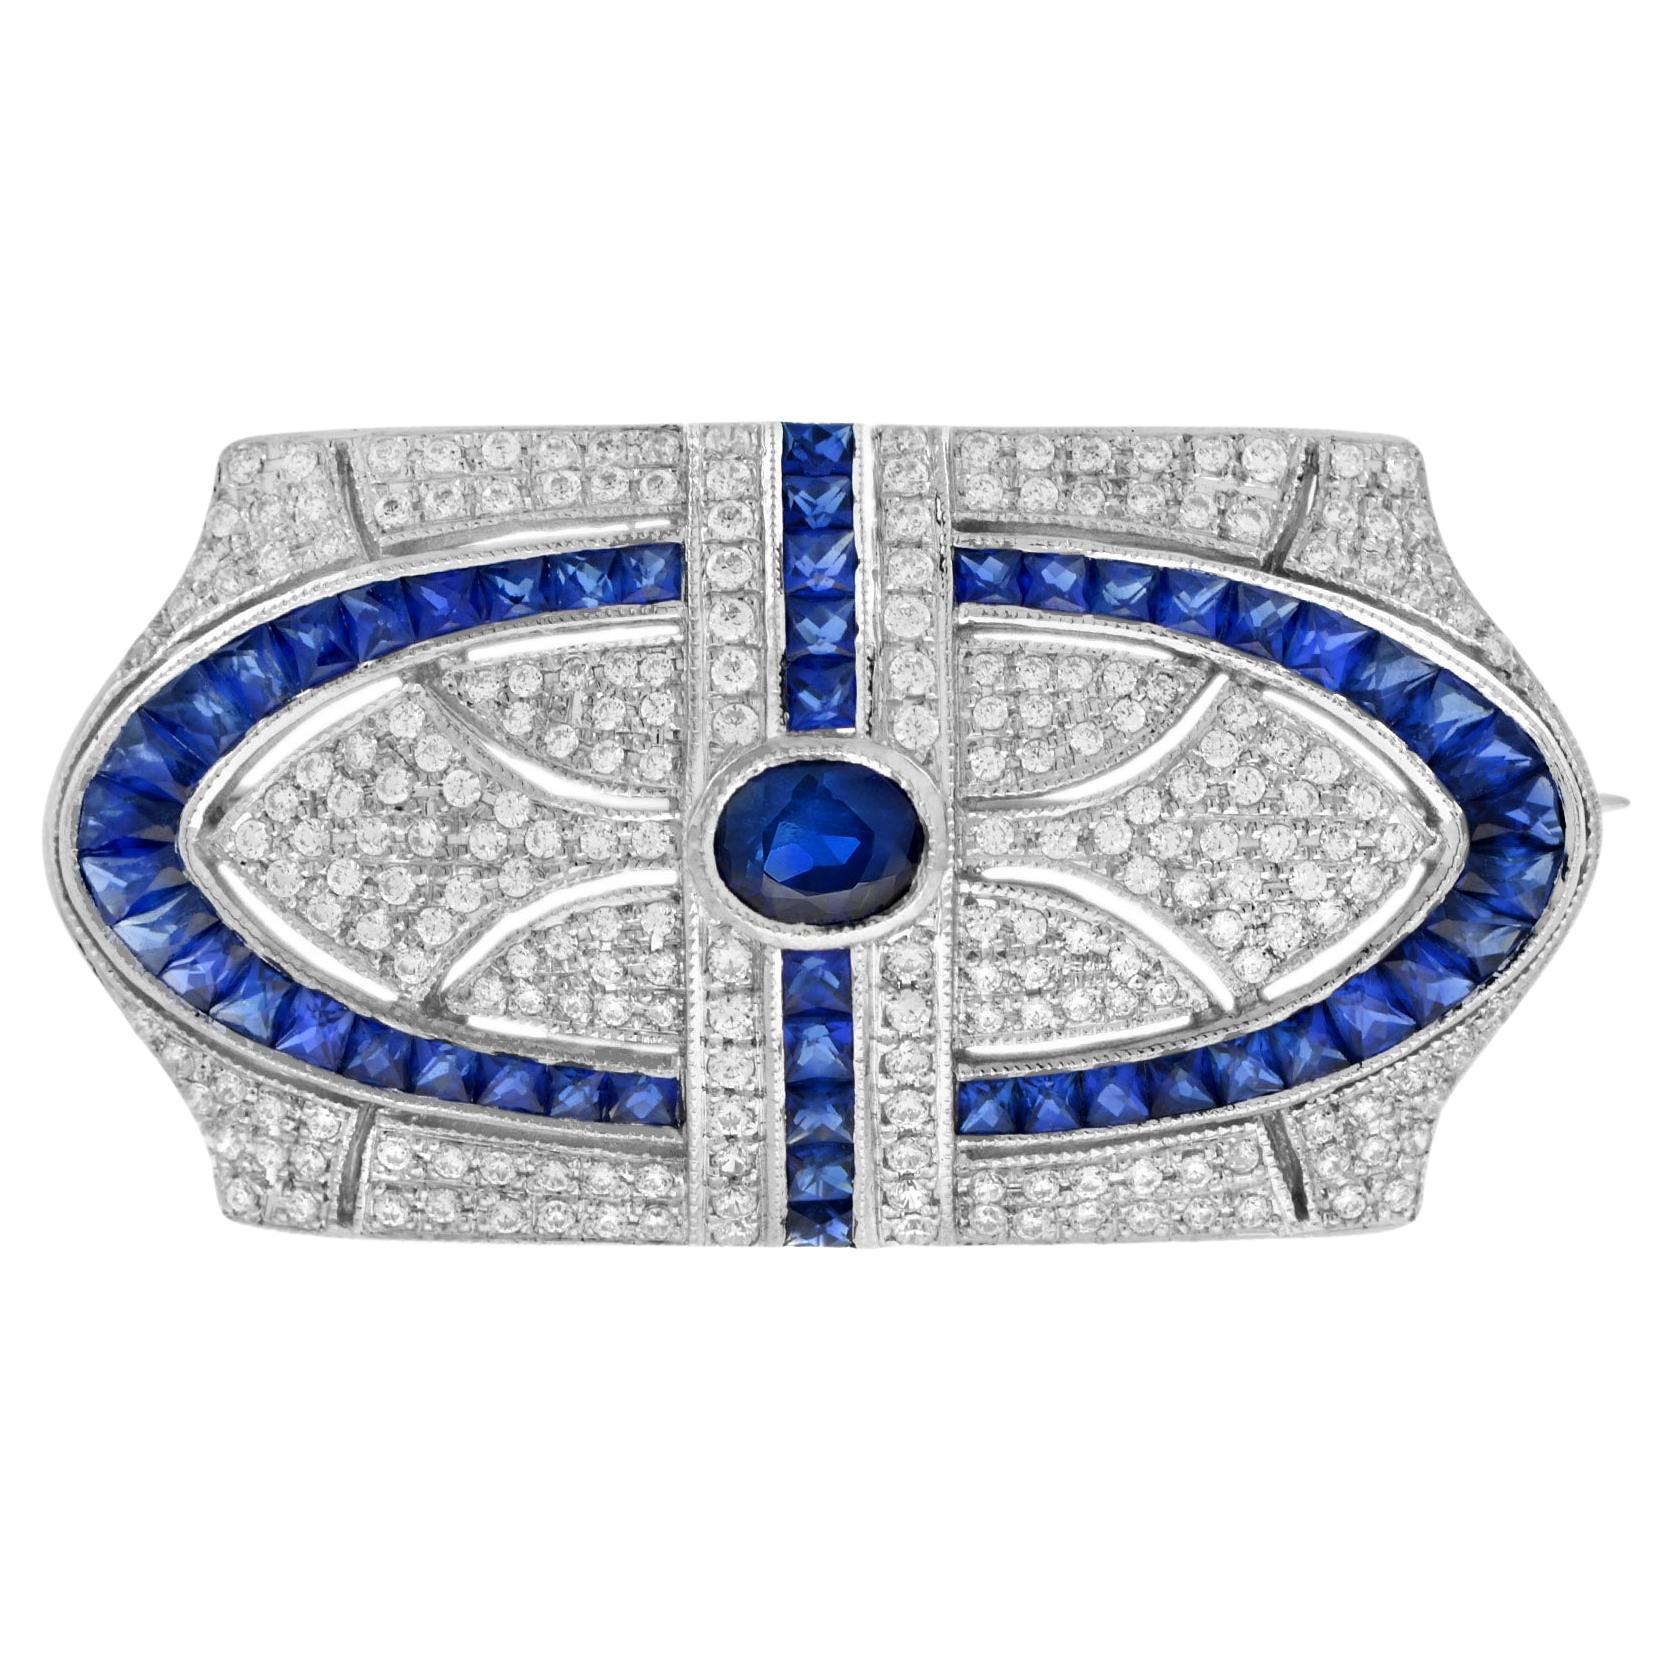 Blue Sapphire and Diamond Antique Style Brooch in 18K White Gold